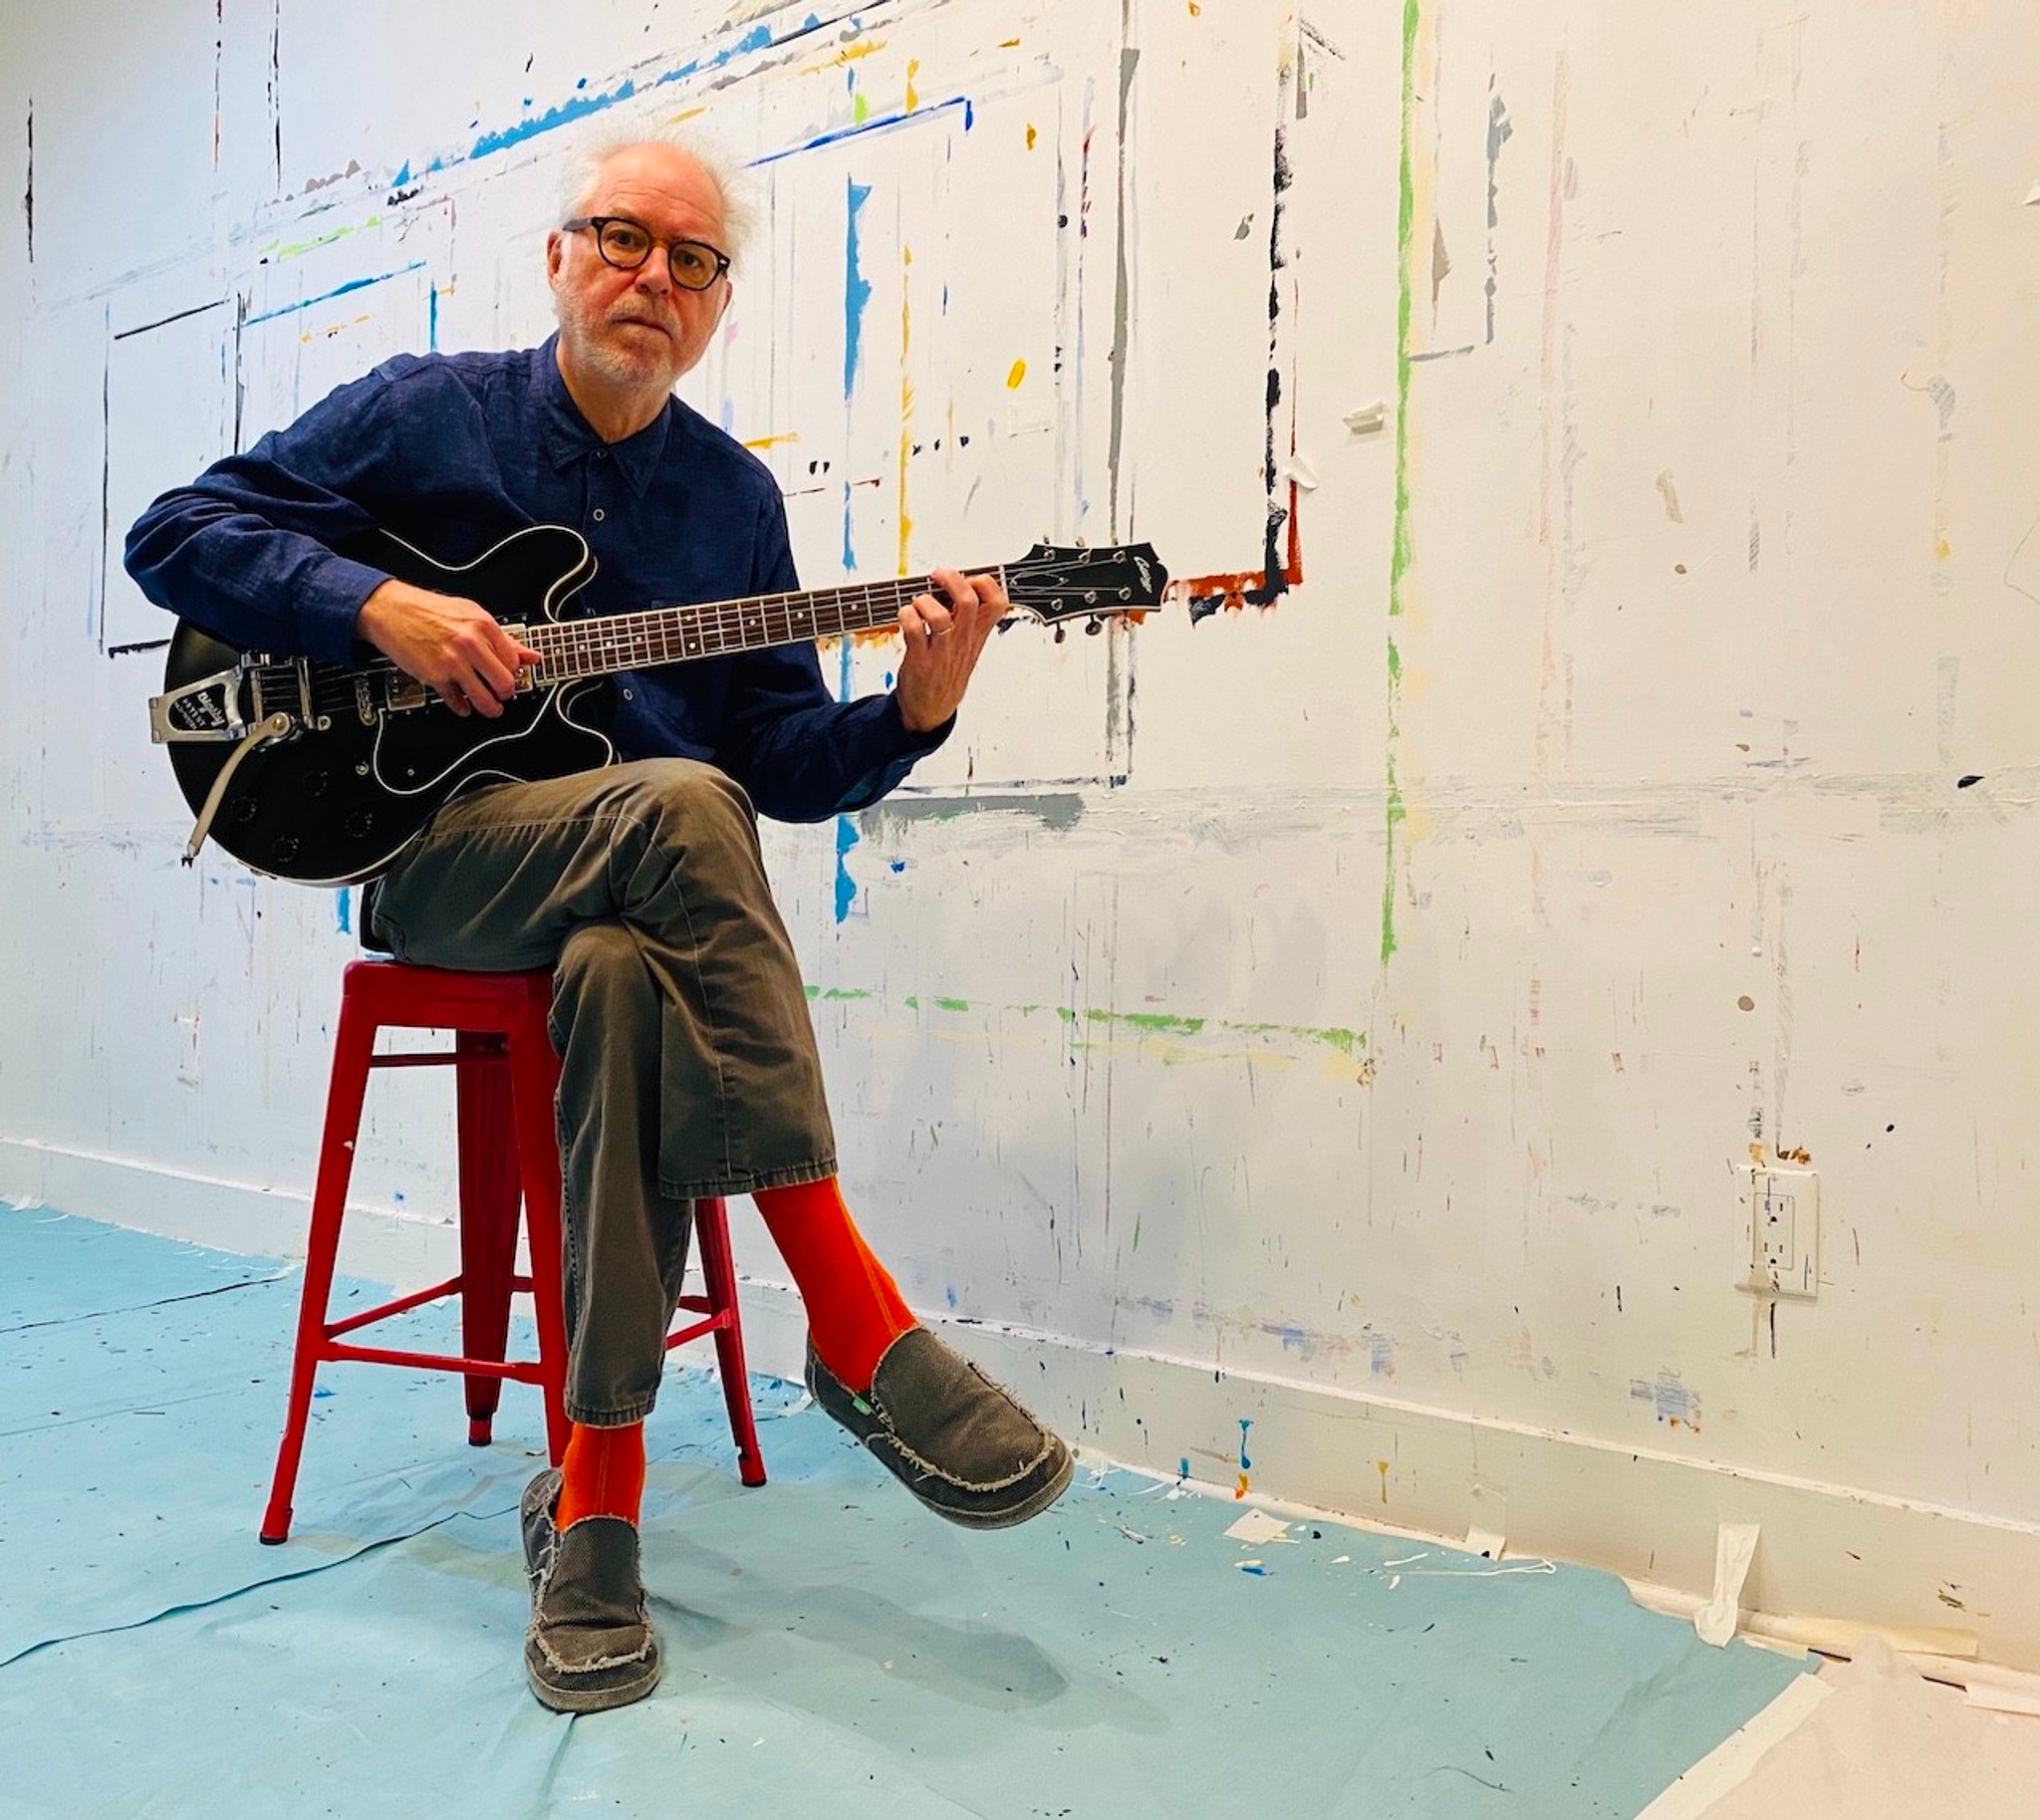 The guitarist Bill Frisell seated on a red stool with one leg crossed over the other where he balances his guitar. He is wearing bright red socks, brown pants, and a blue shirt and is sitting in front of a wall splattered with paint. 